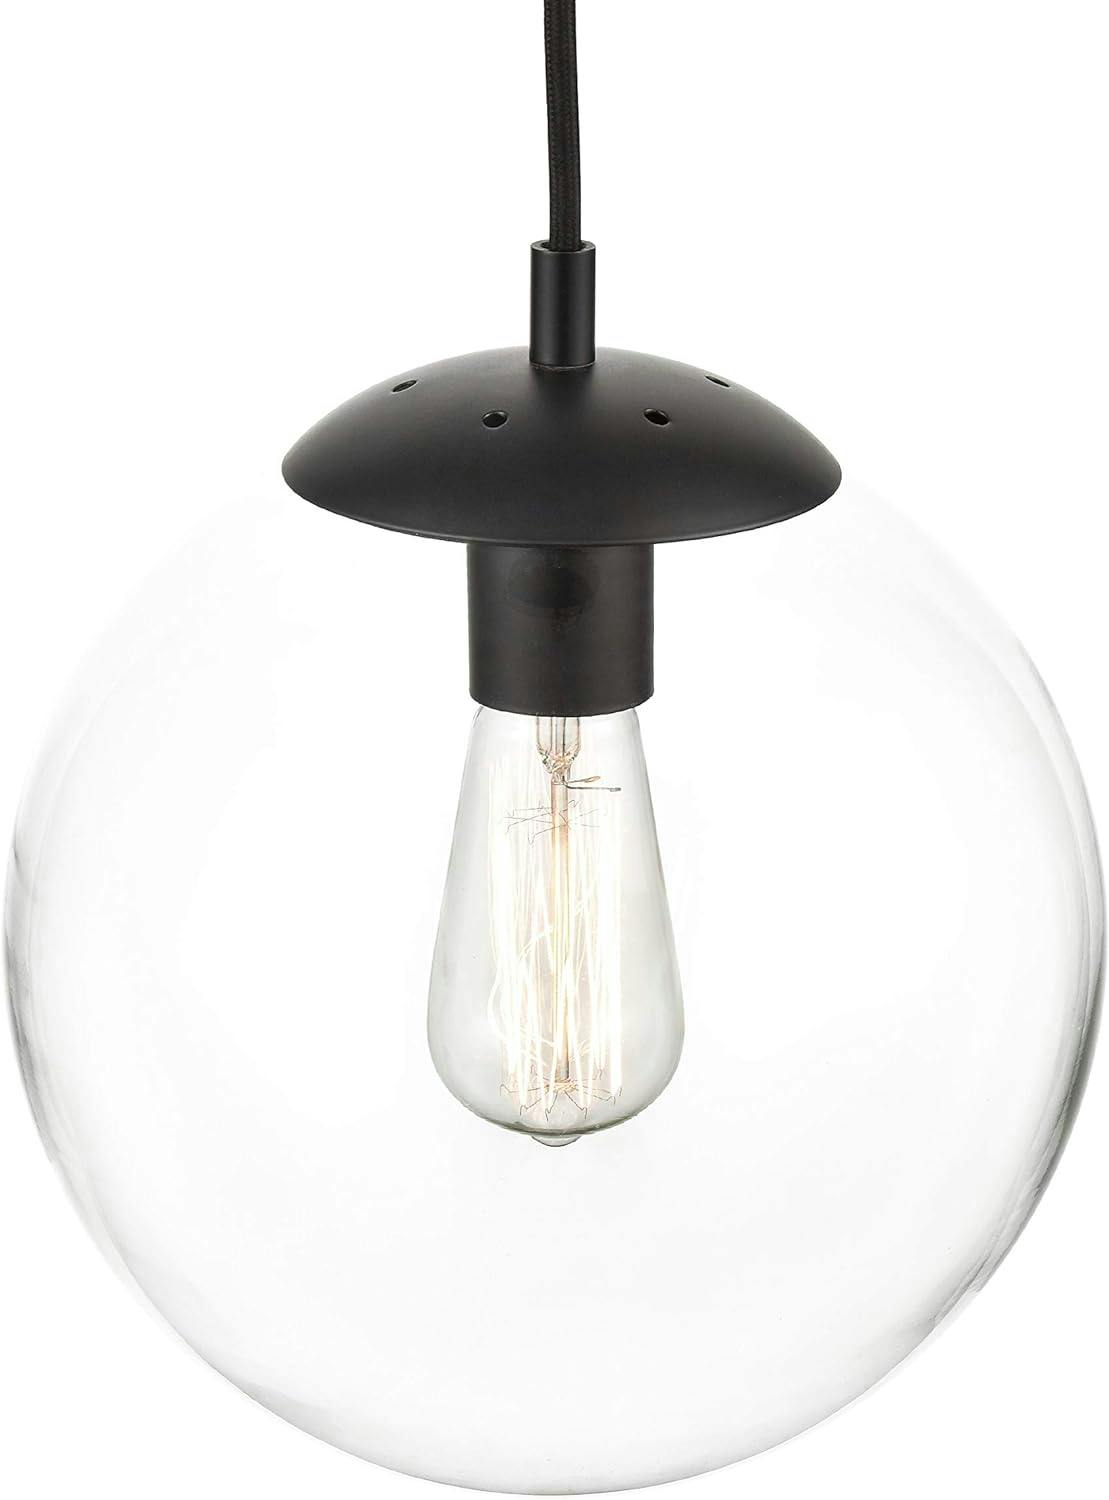 Kalix 14" Black Globe Pendant Light with Wooden Accent